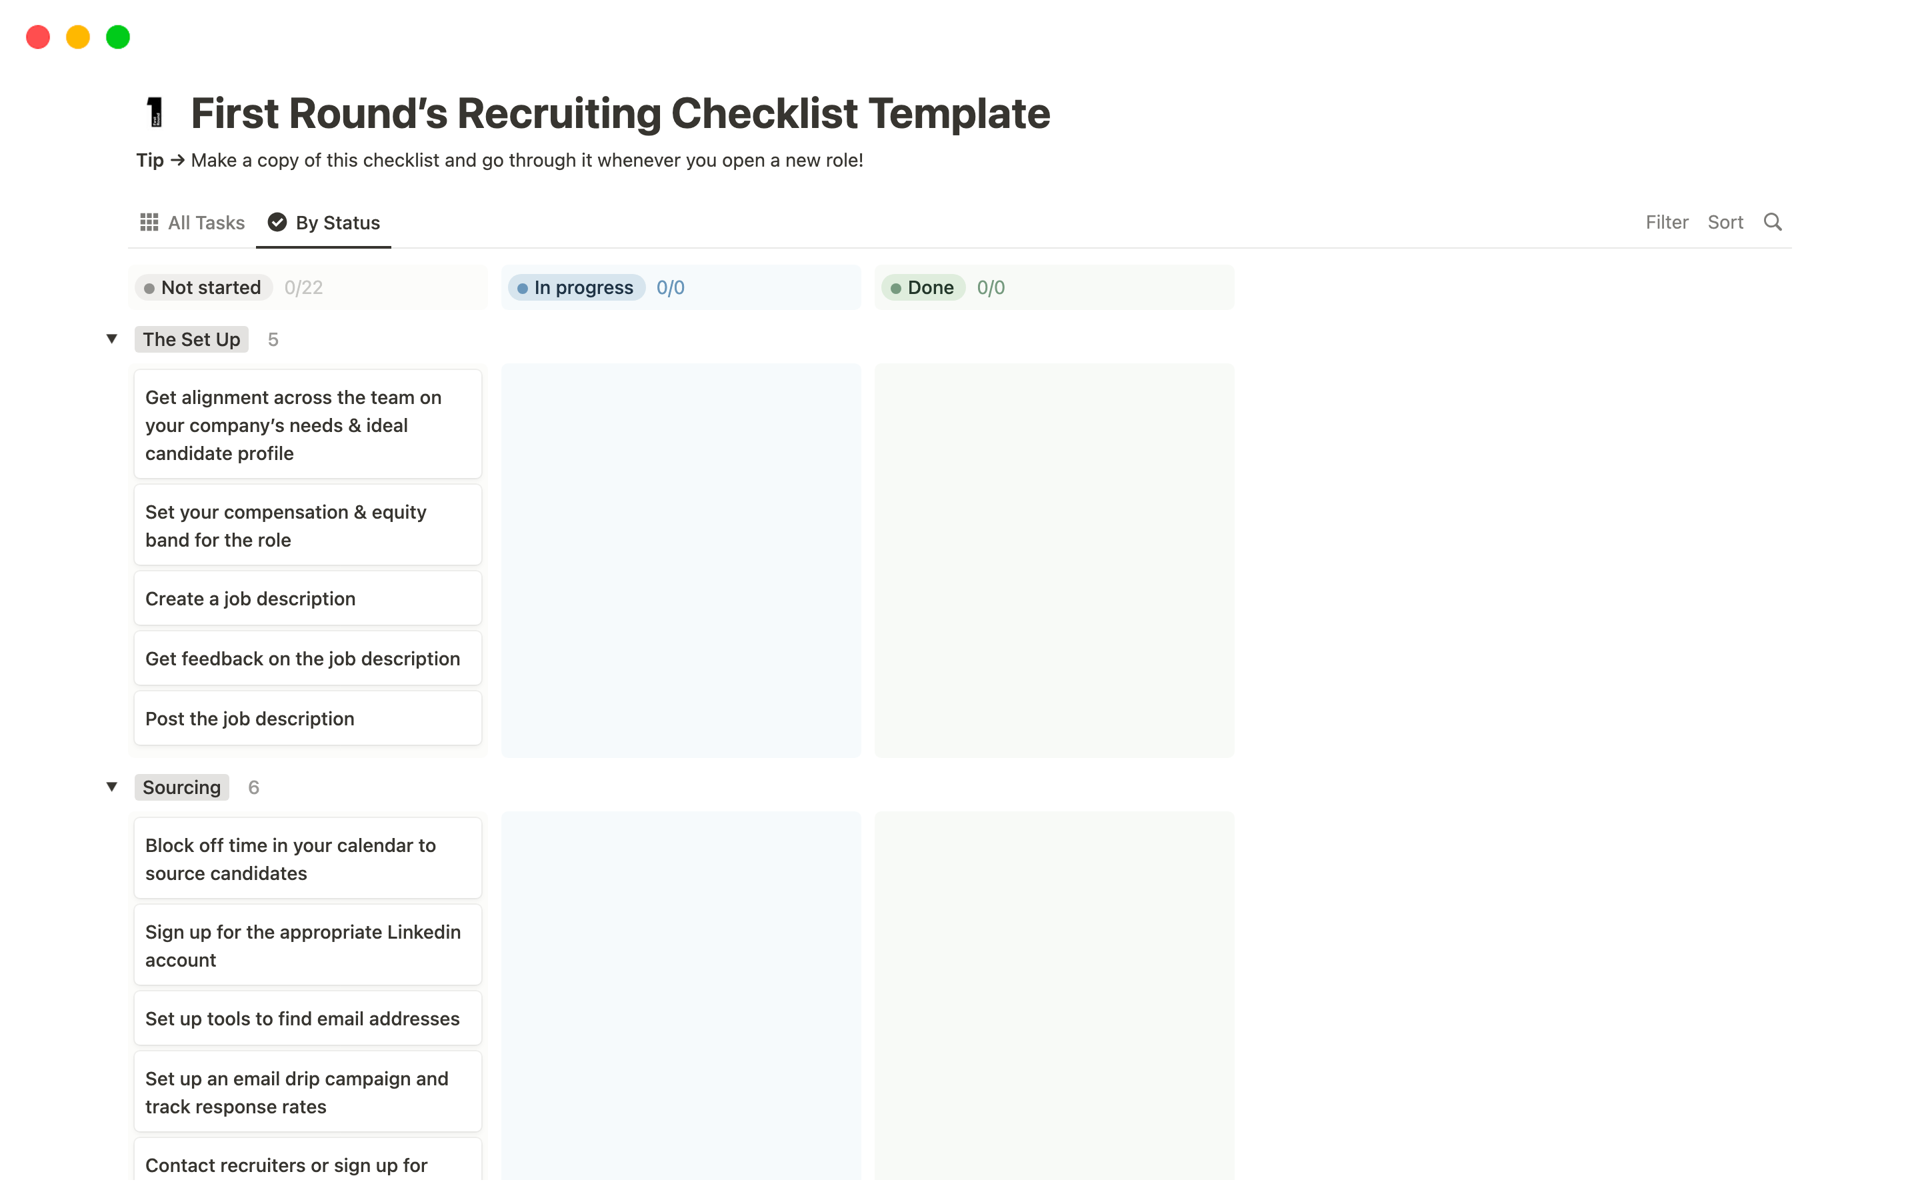 Streamline your recruiting process with this comprehensive checklist template.